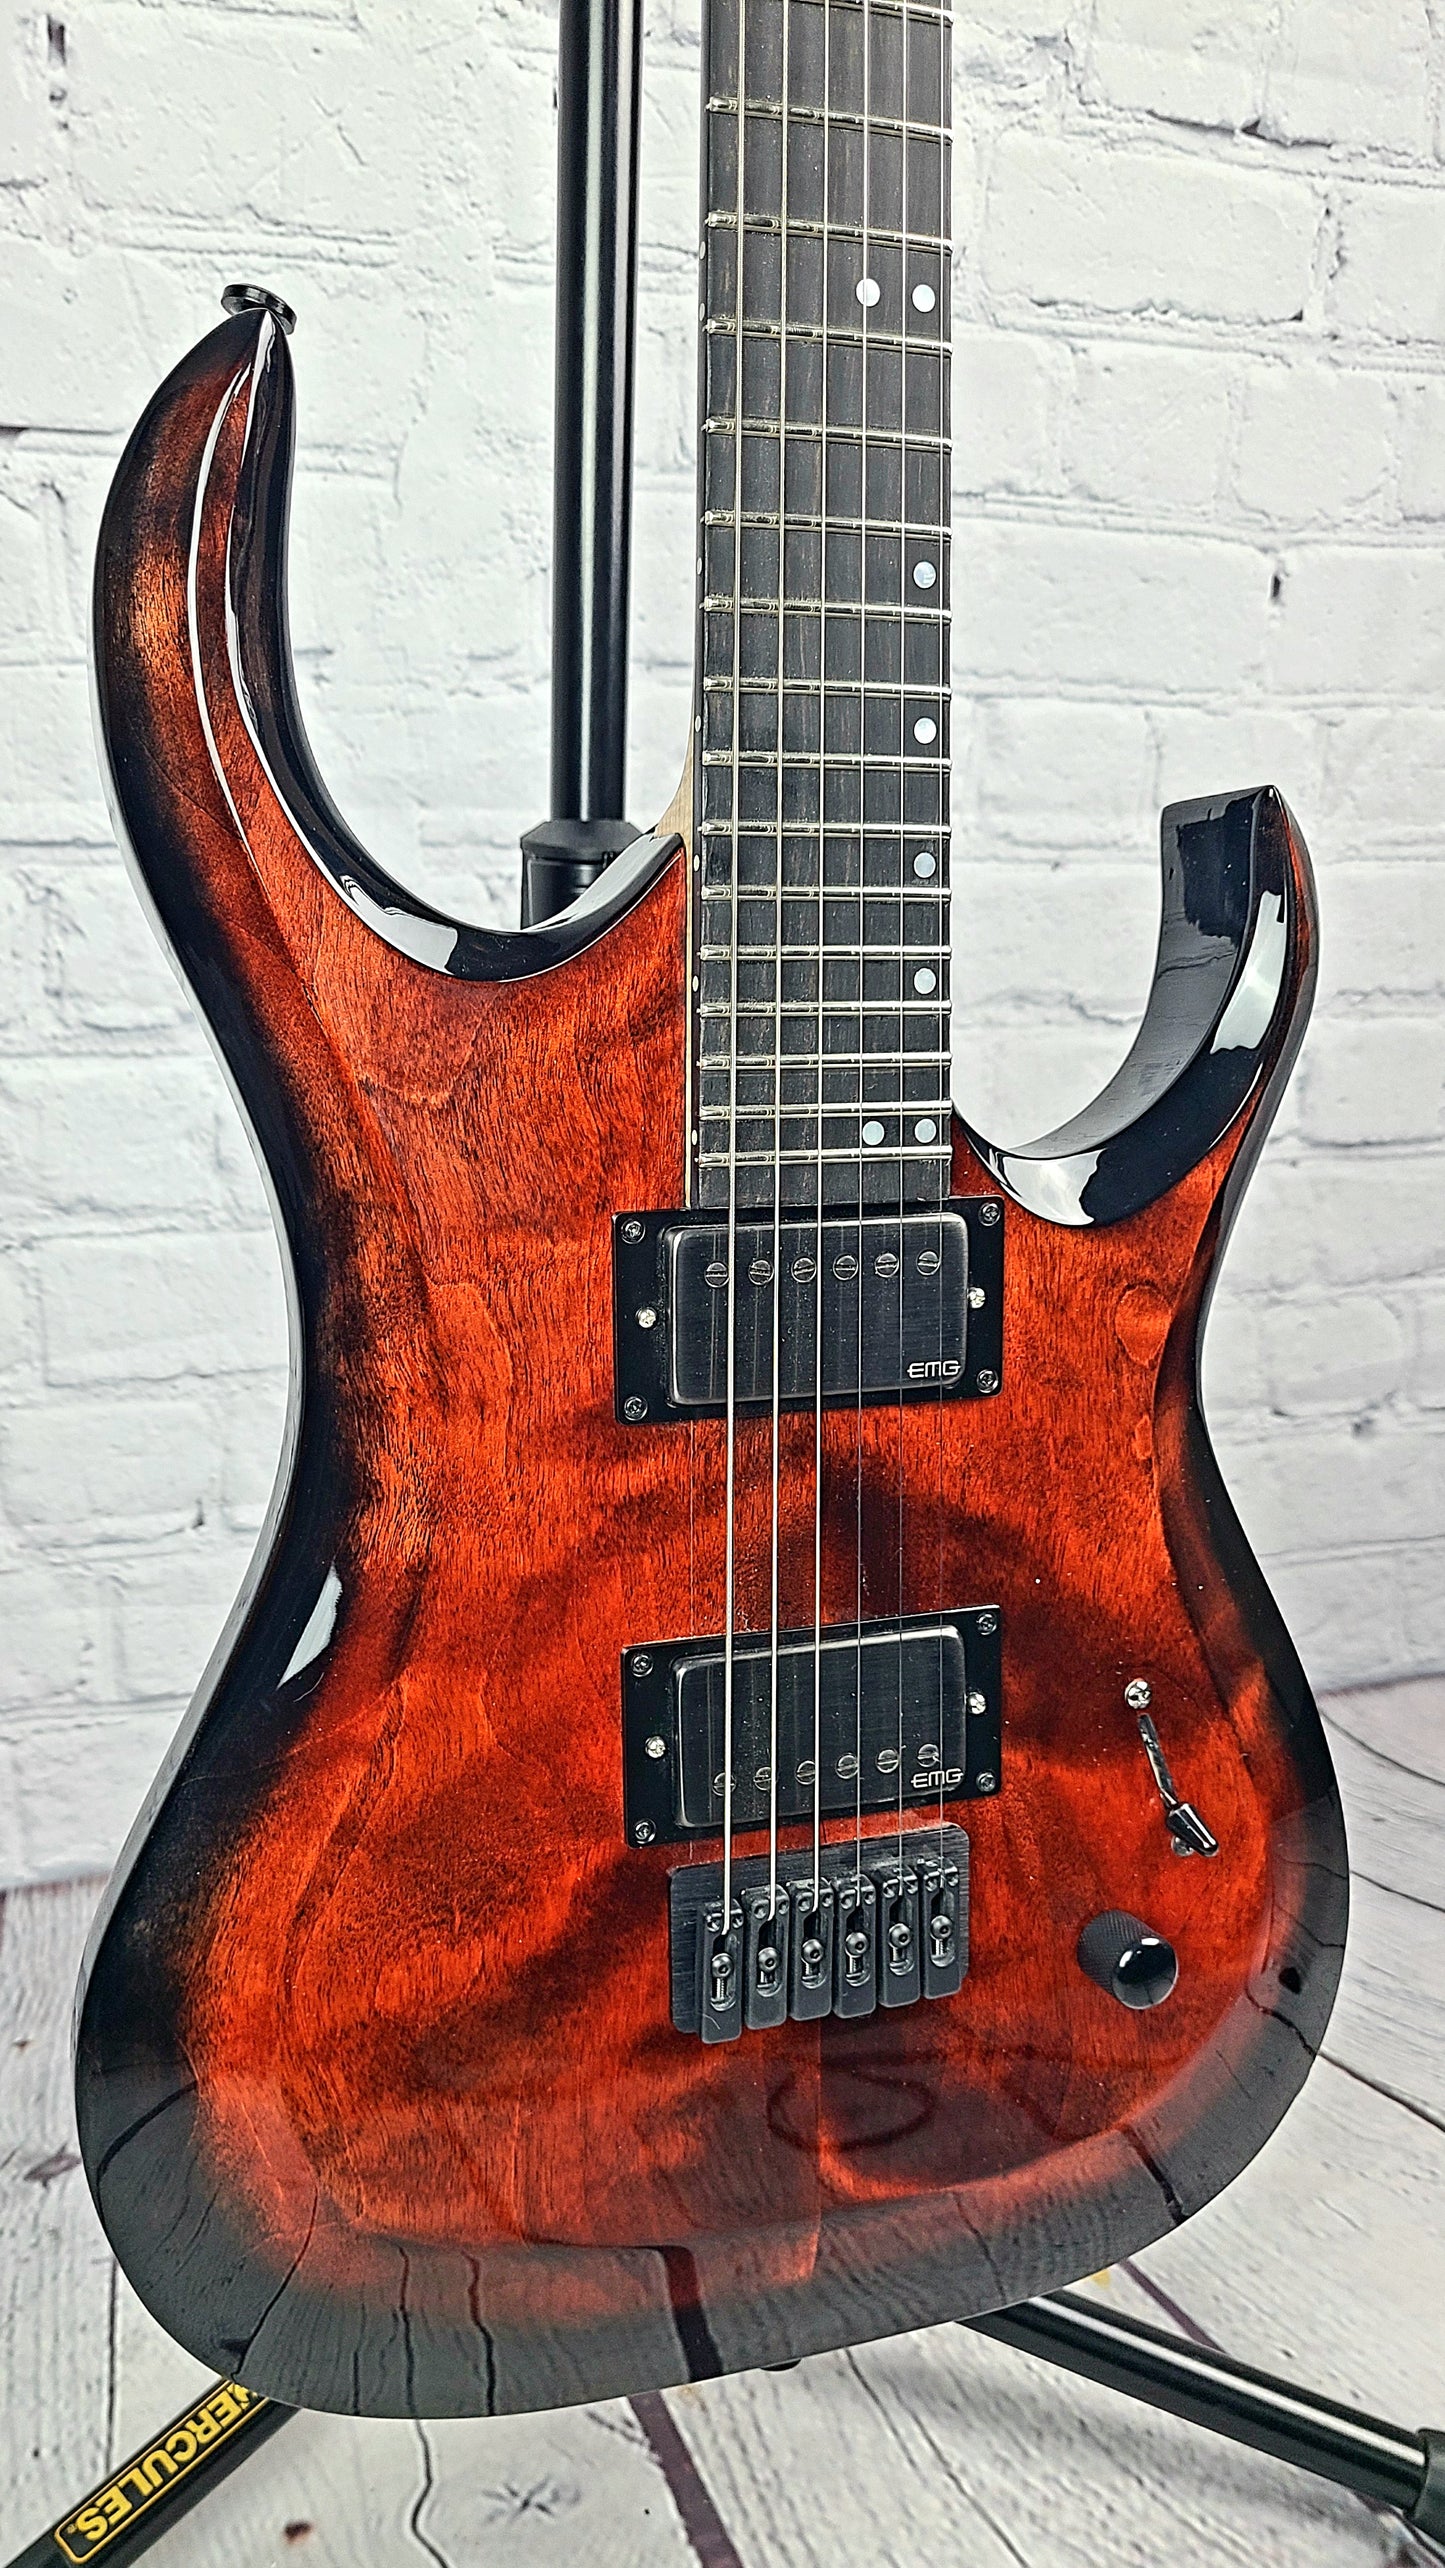 Charbonneau Guitars Scimtar 6S Deluxe String Volcano Burst Electric Guitar Made in Canada